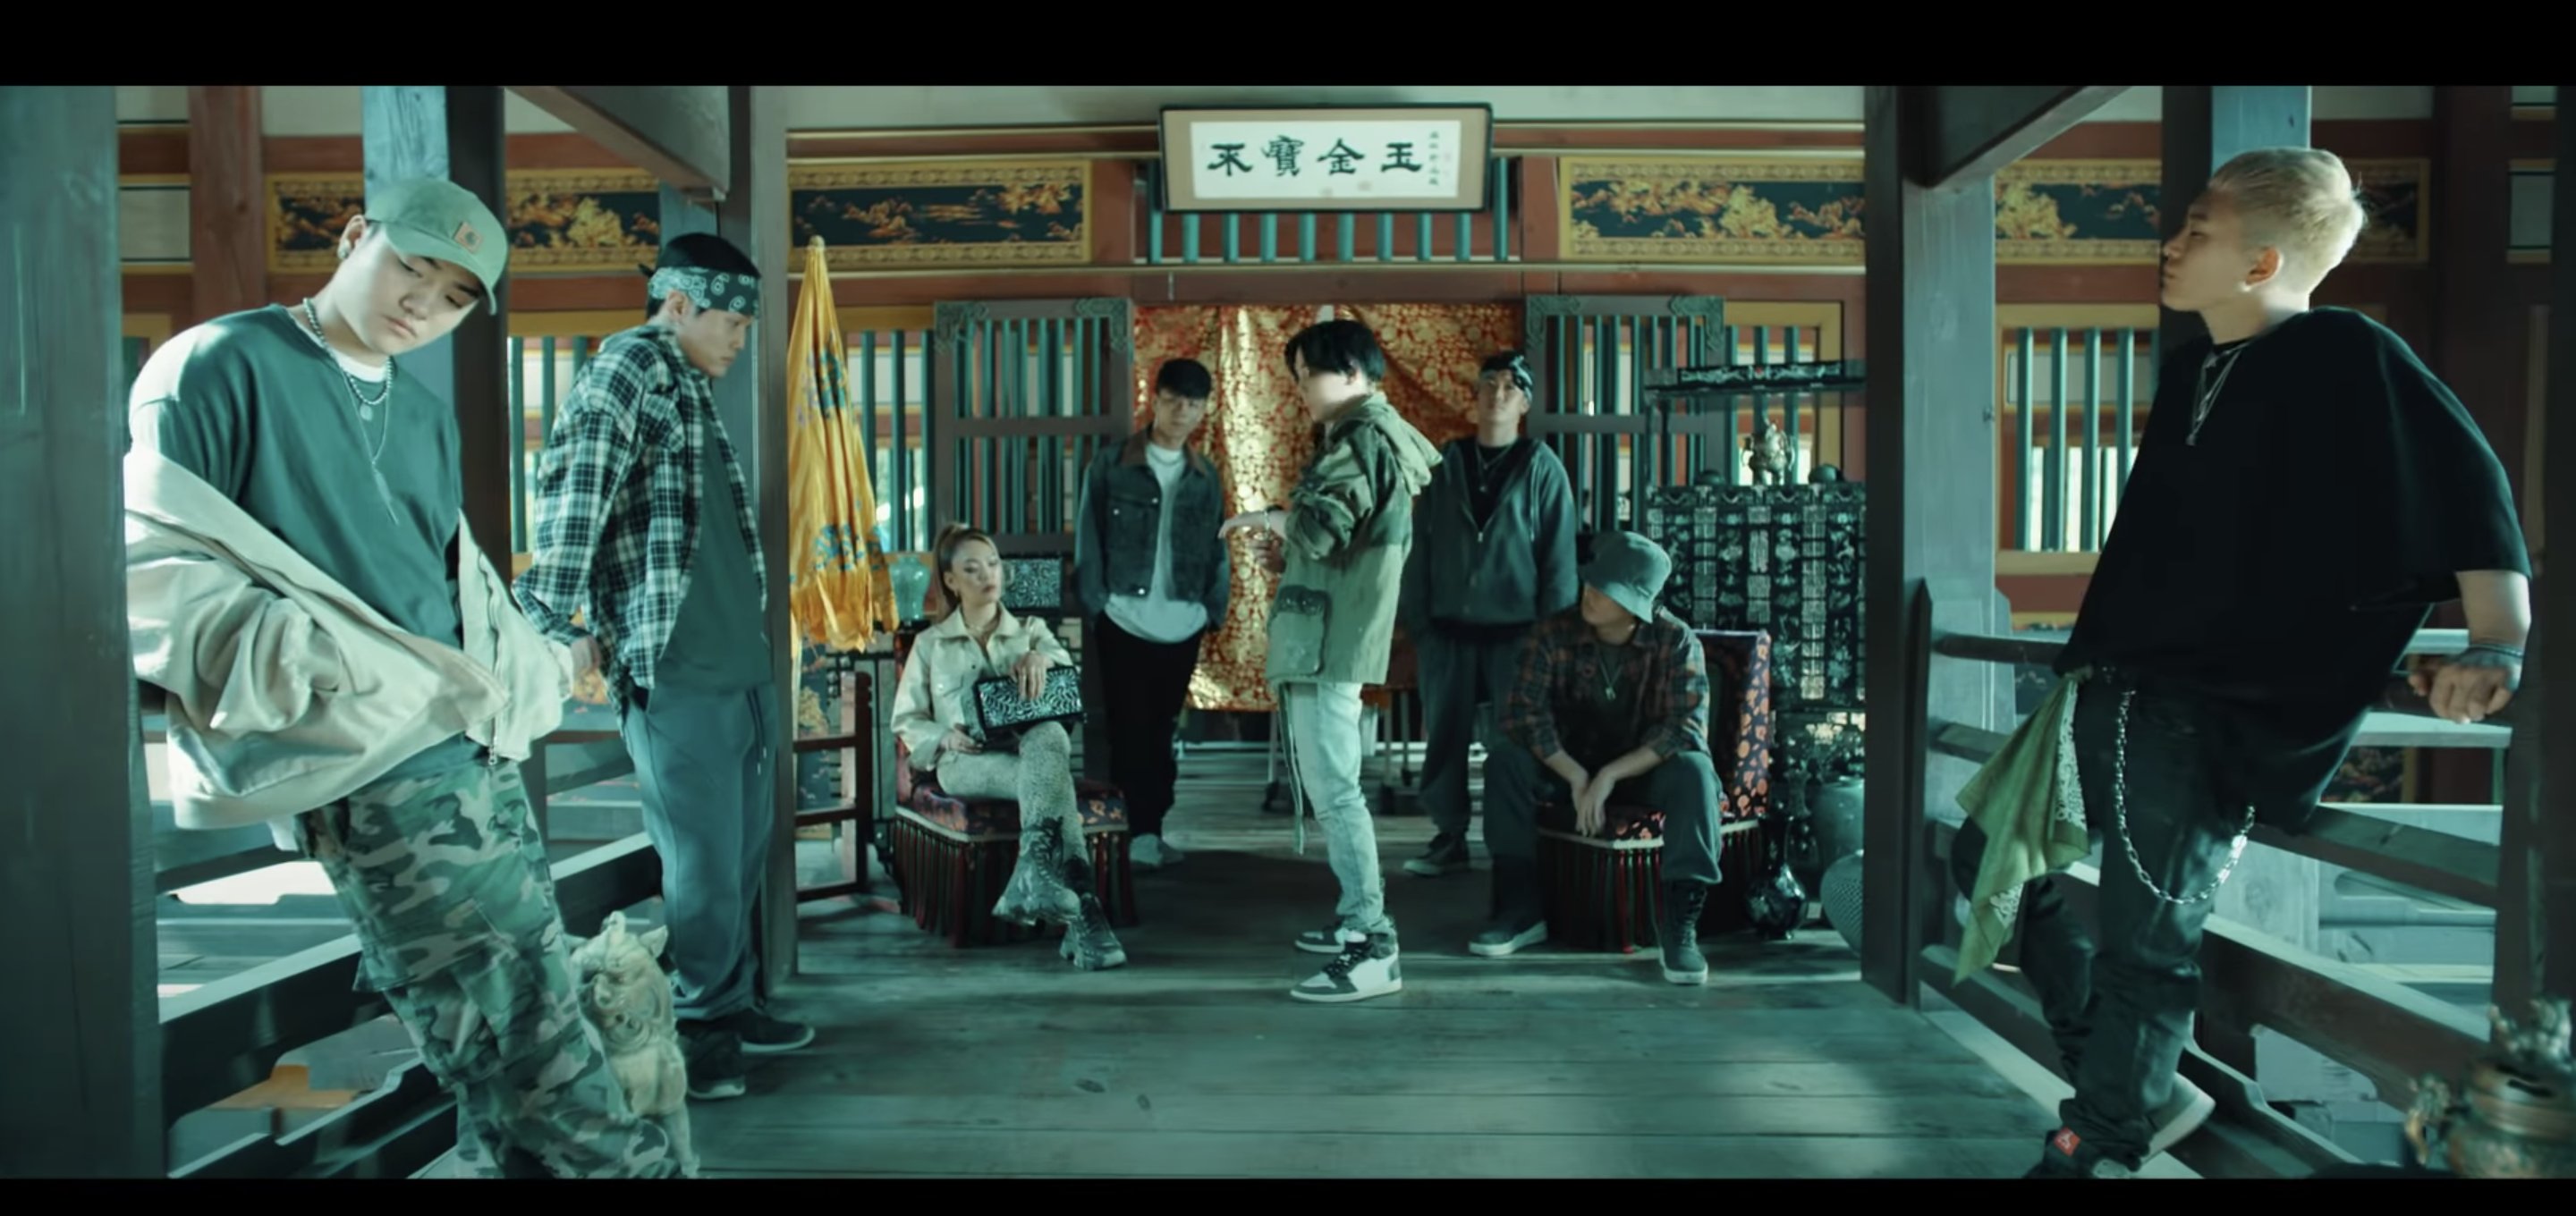 Screencap of Agust D Daechwita banner with Confucius saying 不宝金玉